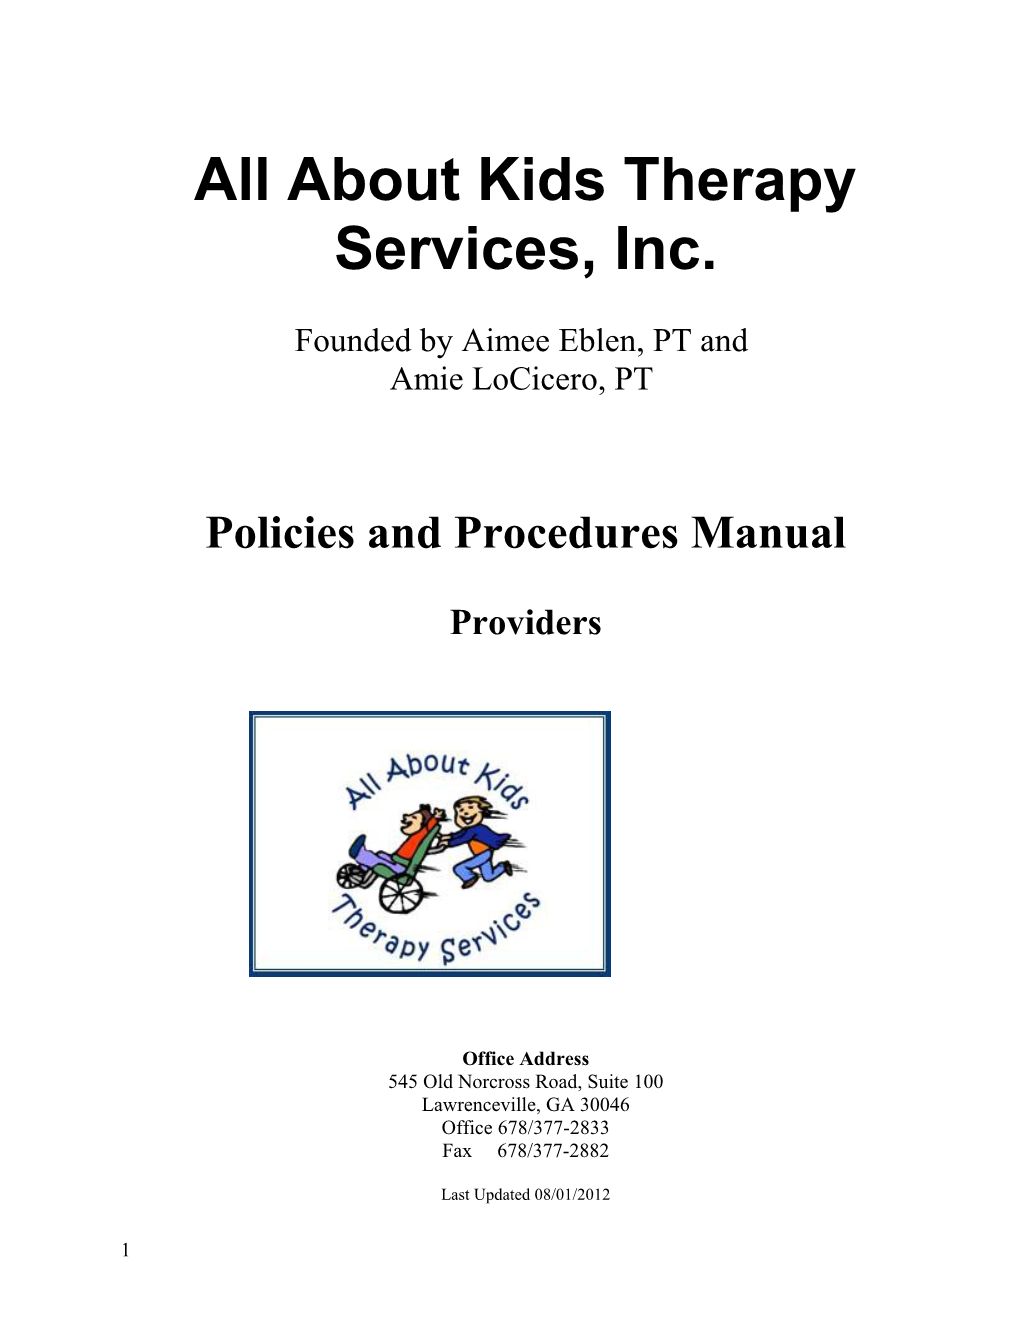 All About Kids Therapy Services, Inc